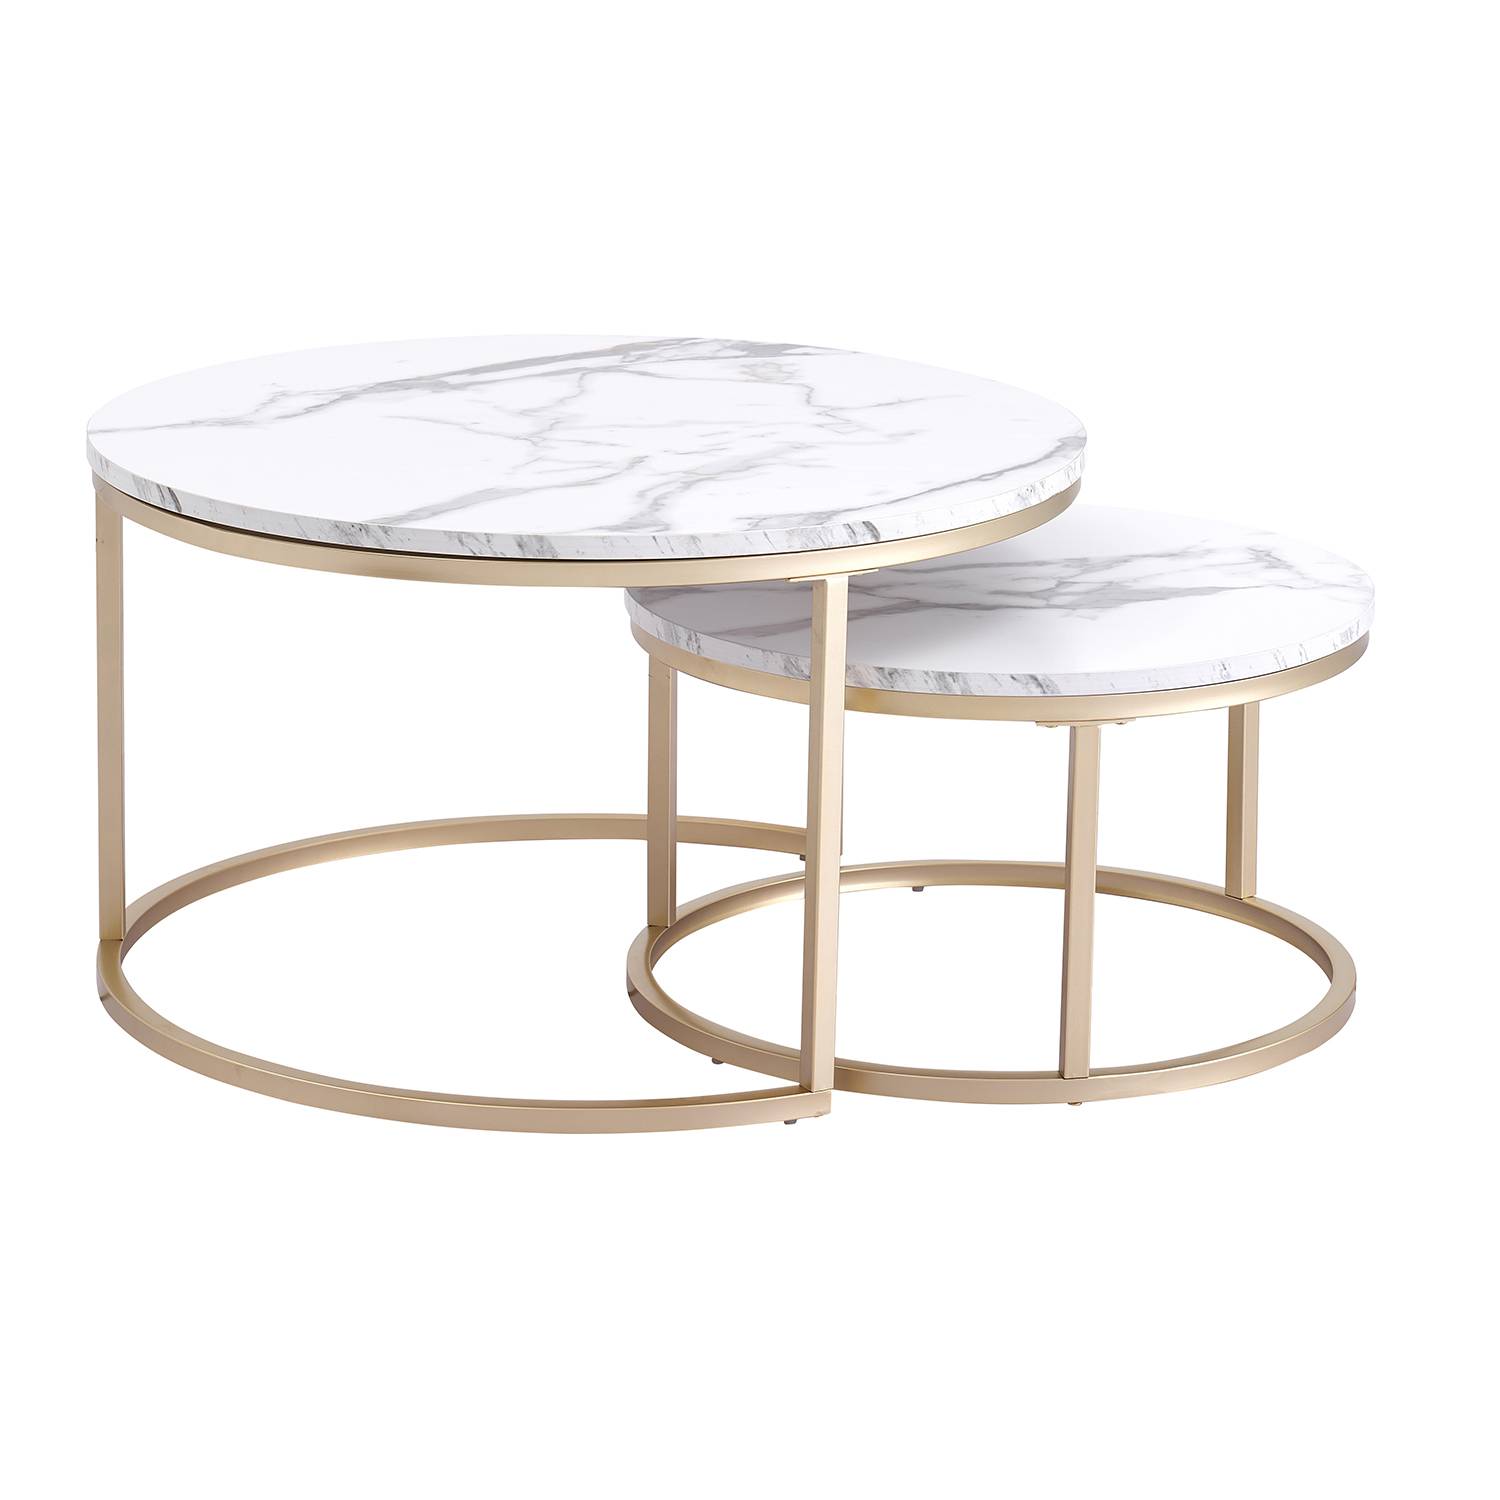 2Pcs Marble Texture Coffee Table for Living Room Sofa Side Round Coffee Tea Table 2 in 1 Combination Furniture Golden White Huonekalut